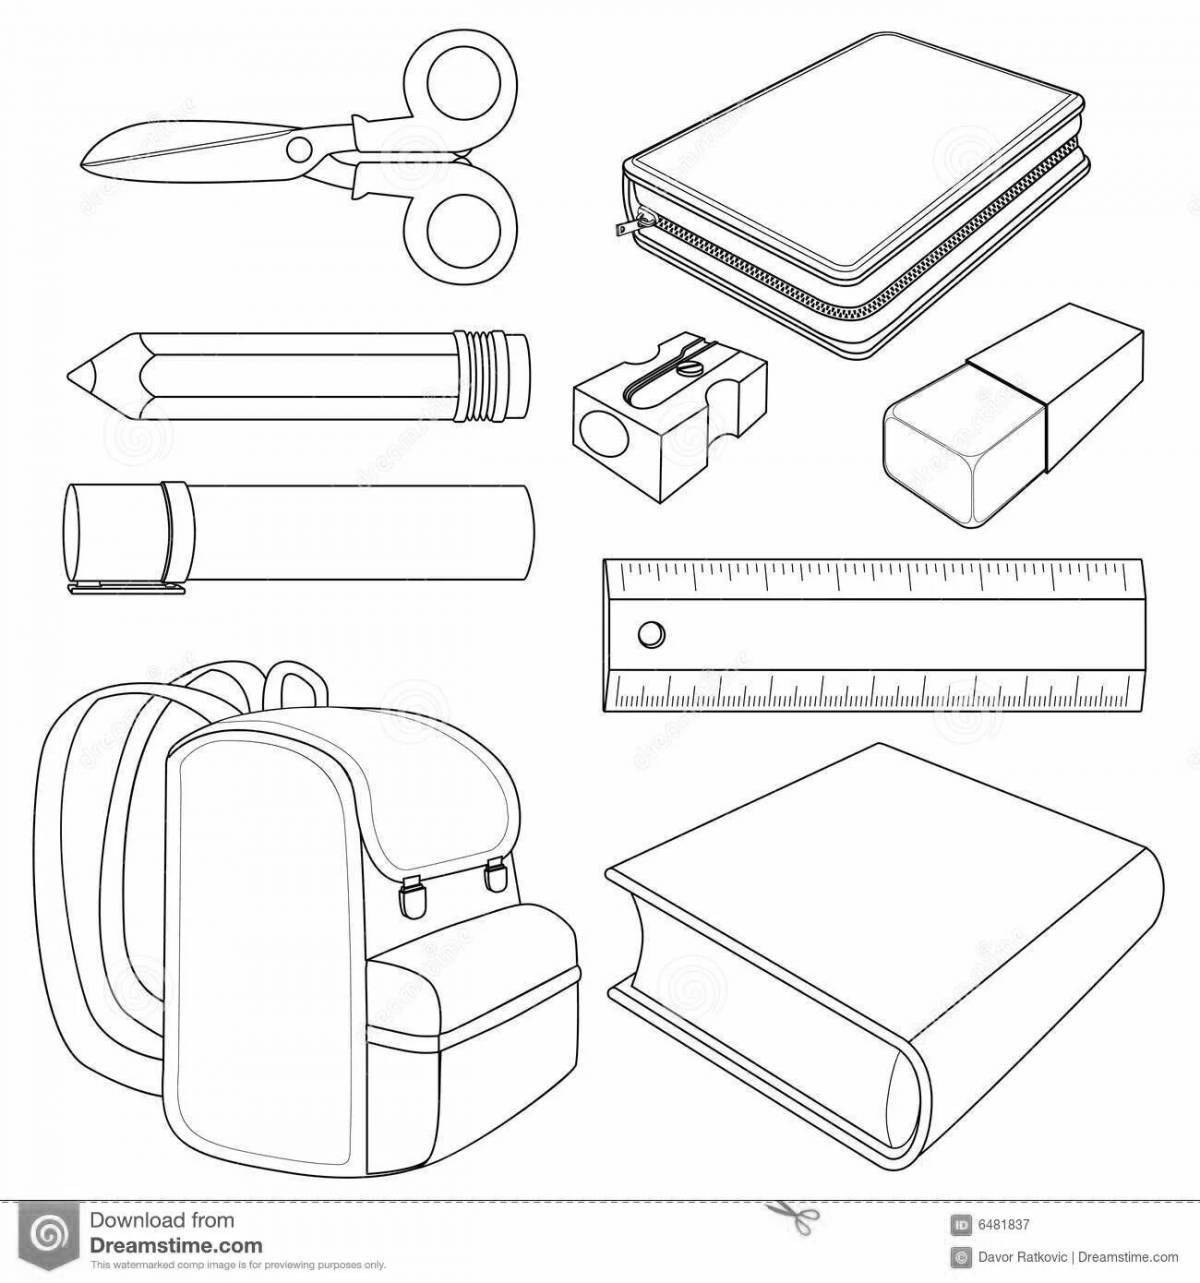 Coloring book for school supplies